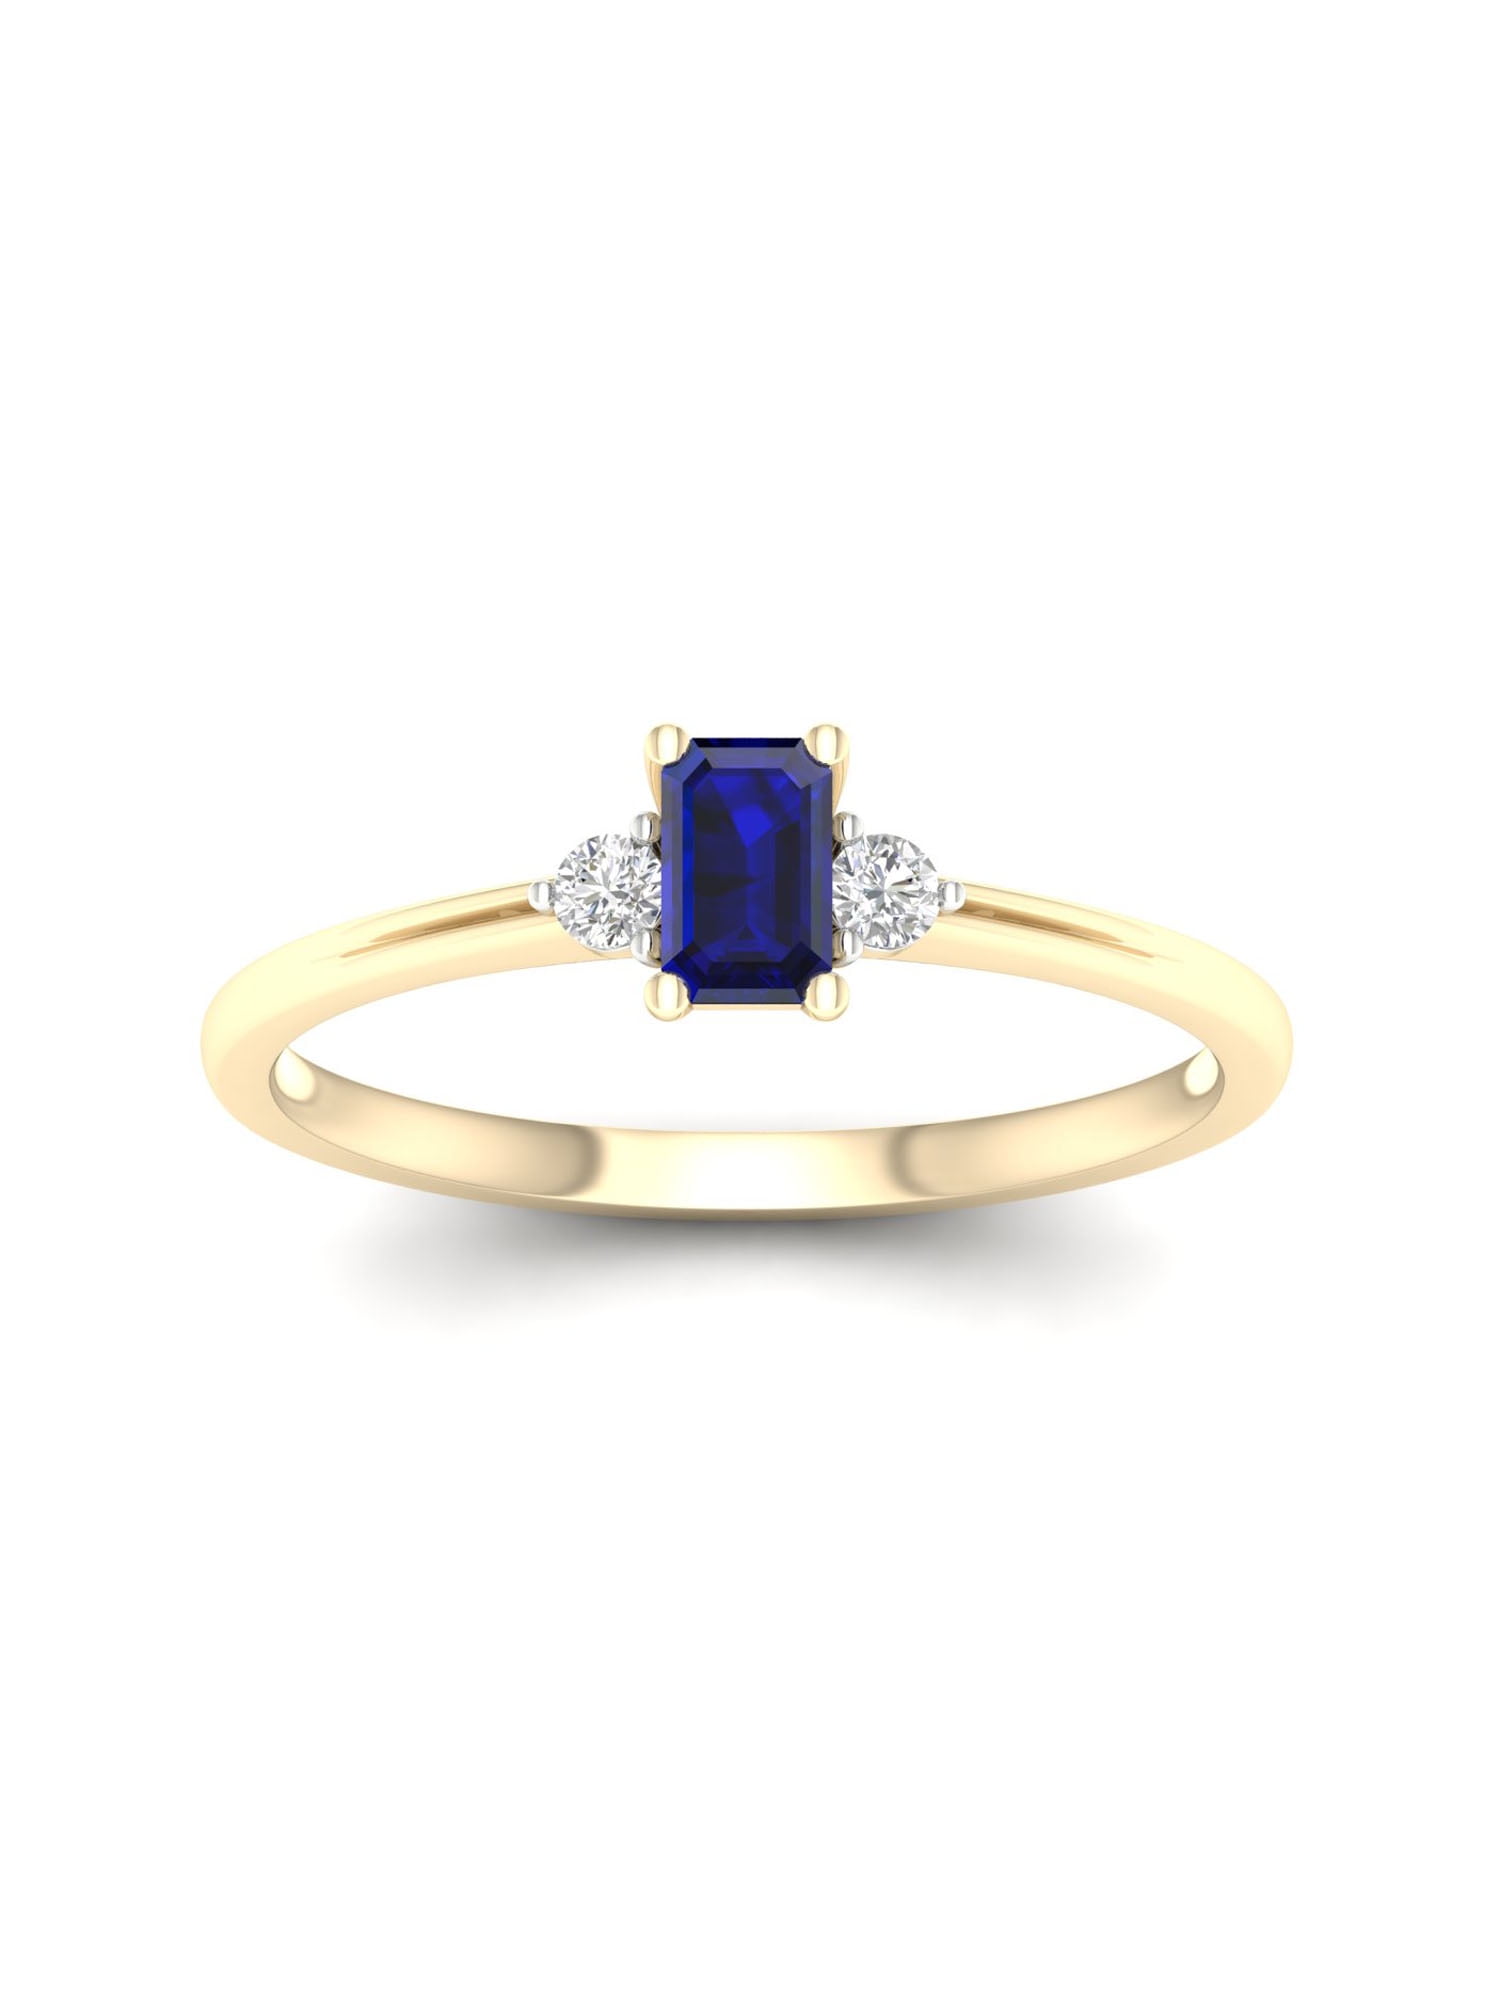 Sizes 4-13 10k Yellow or White Gold Oval 5 x 3mm Sapphire And Diamond Ring 